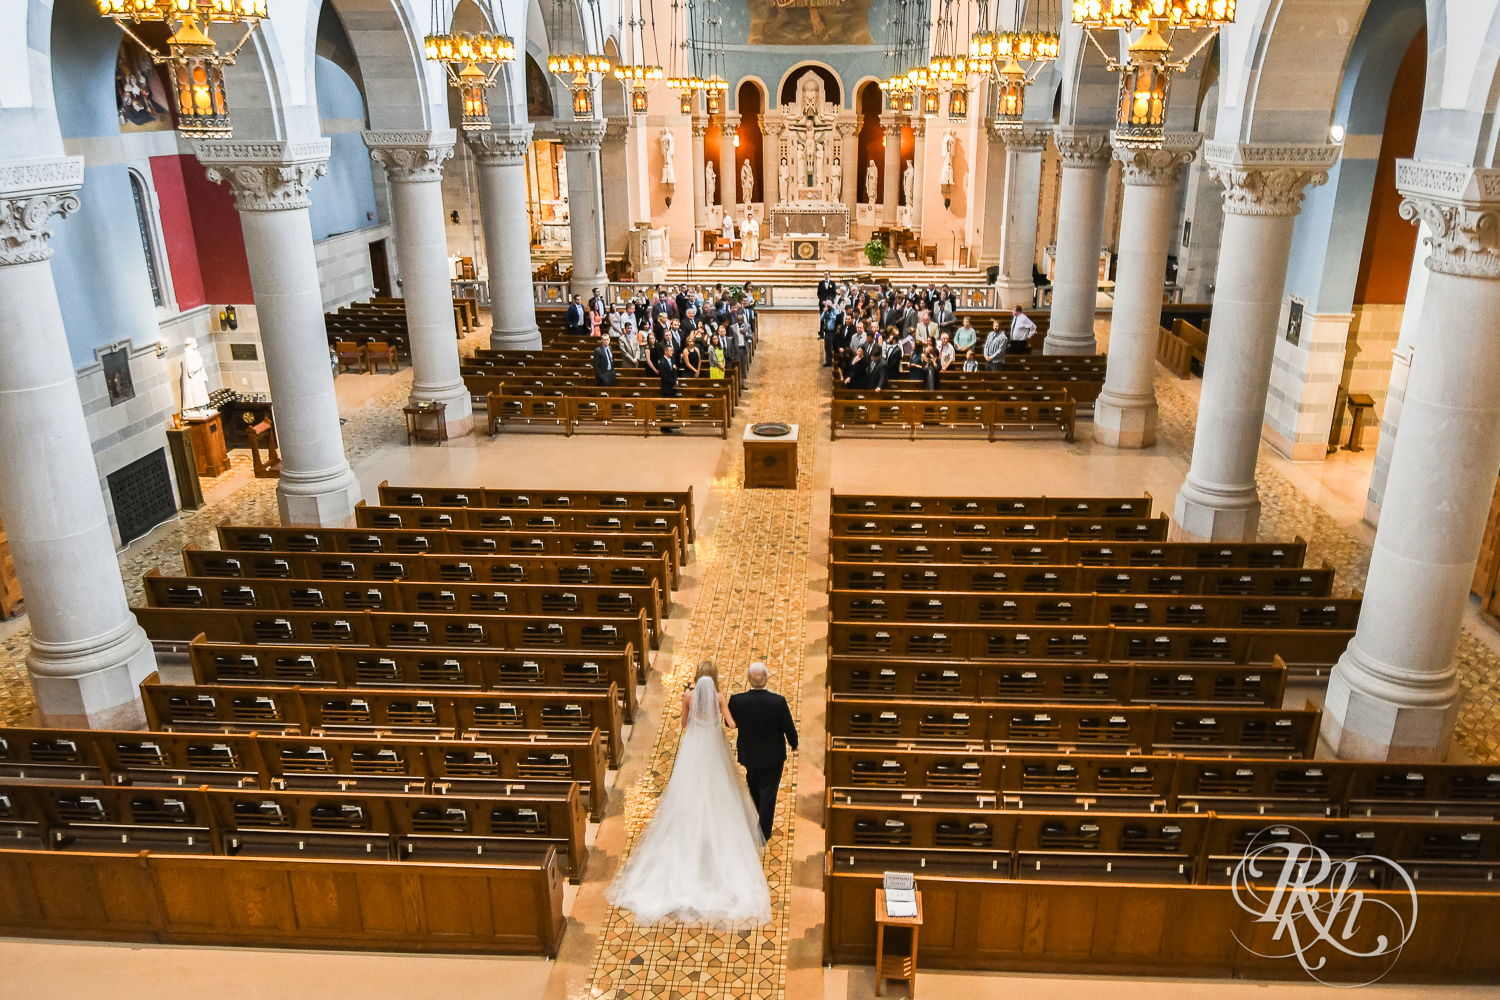 Bride and dad walk down the aisle during wedding ceremony at St. Thomas Moore Catholic Church in Saint Paul, Minnesota.